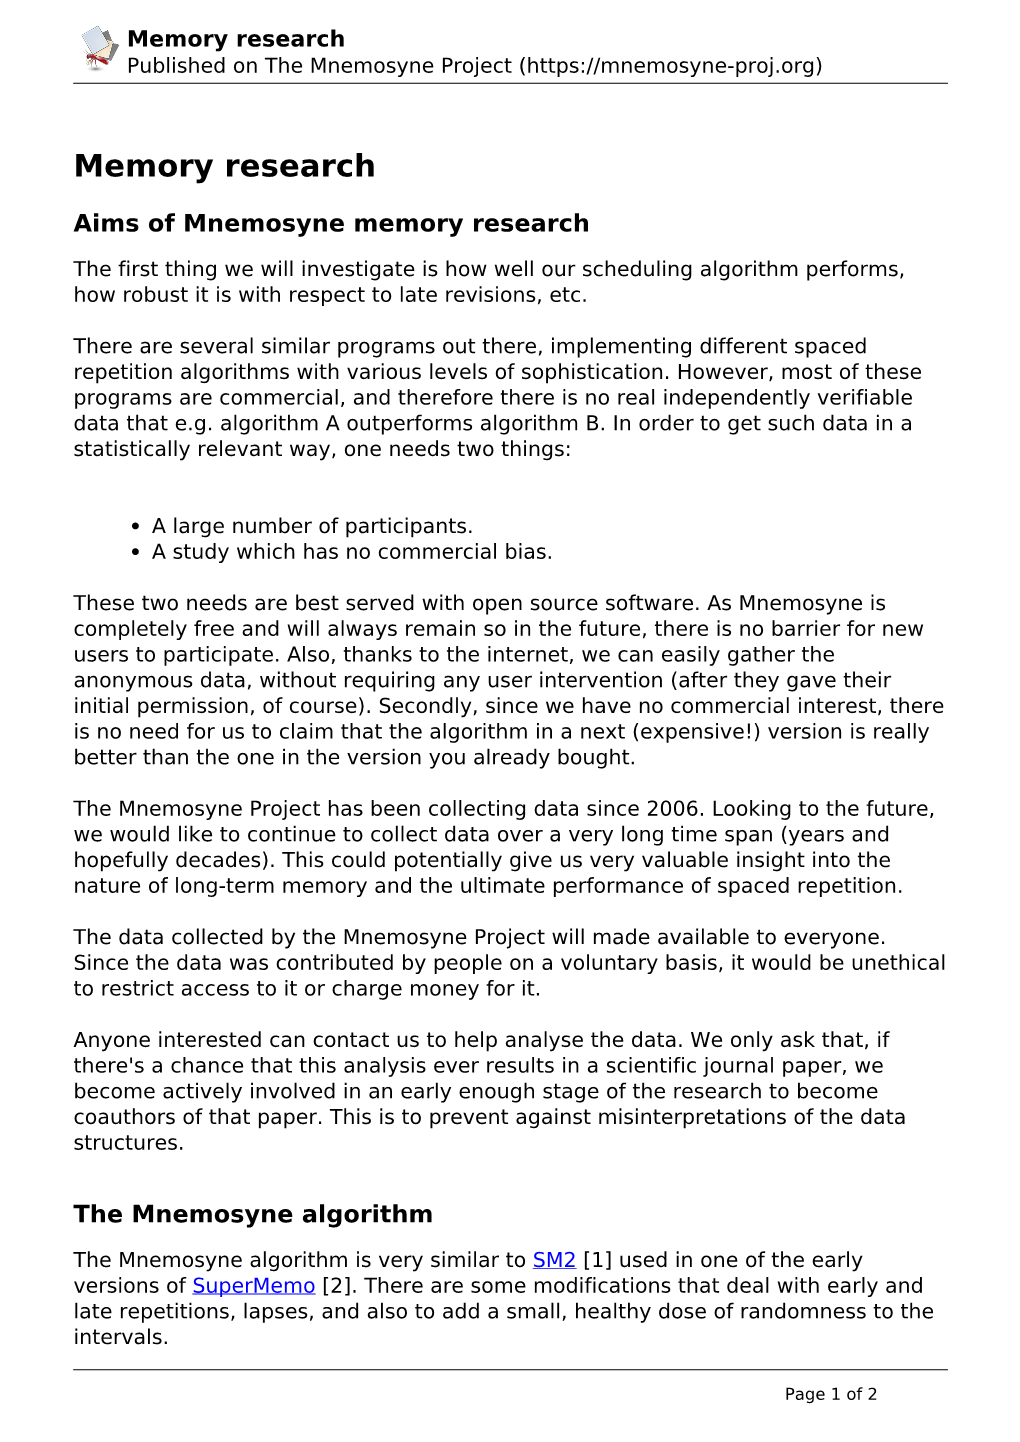 Memory Research Published on the Mnemosyne Project (